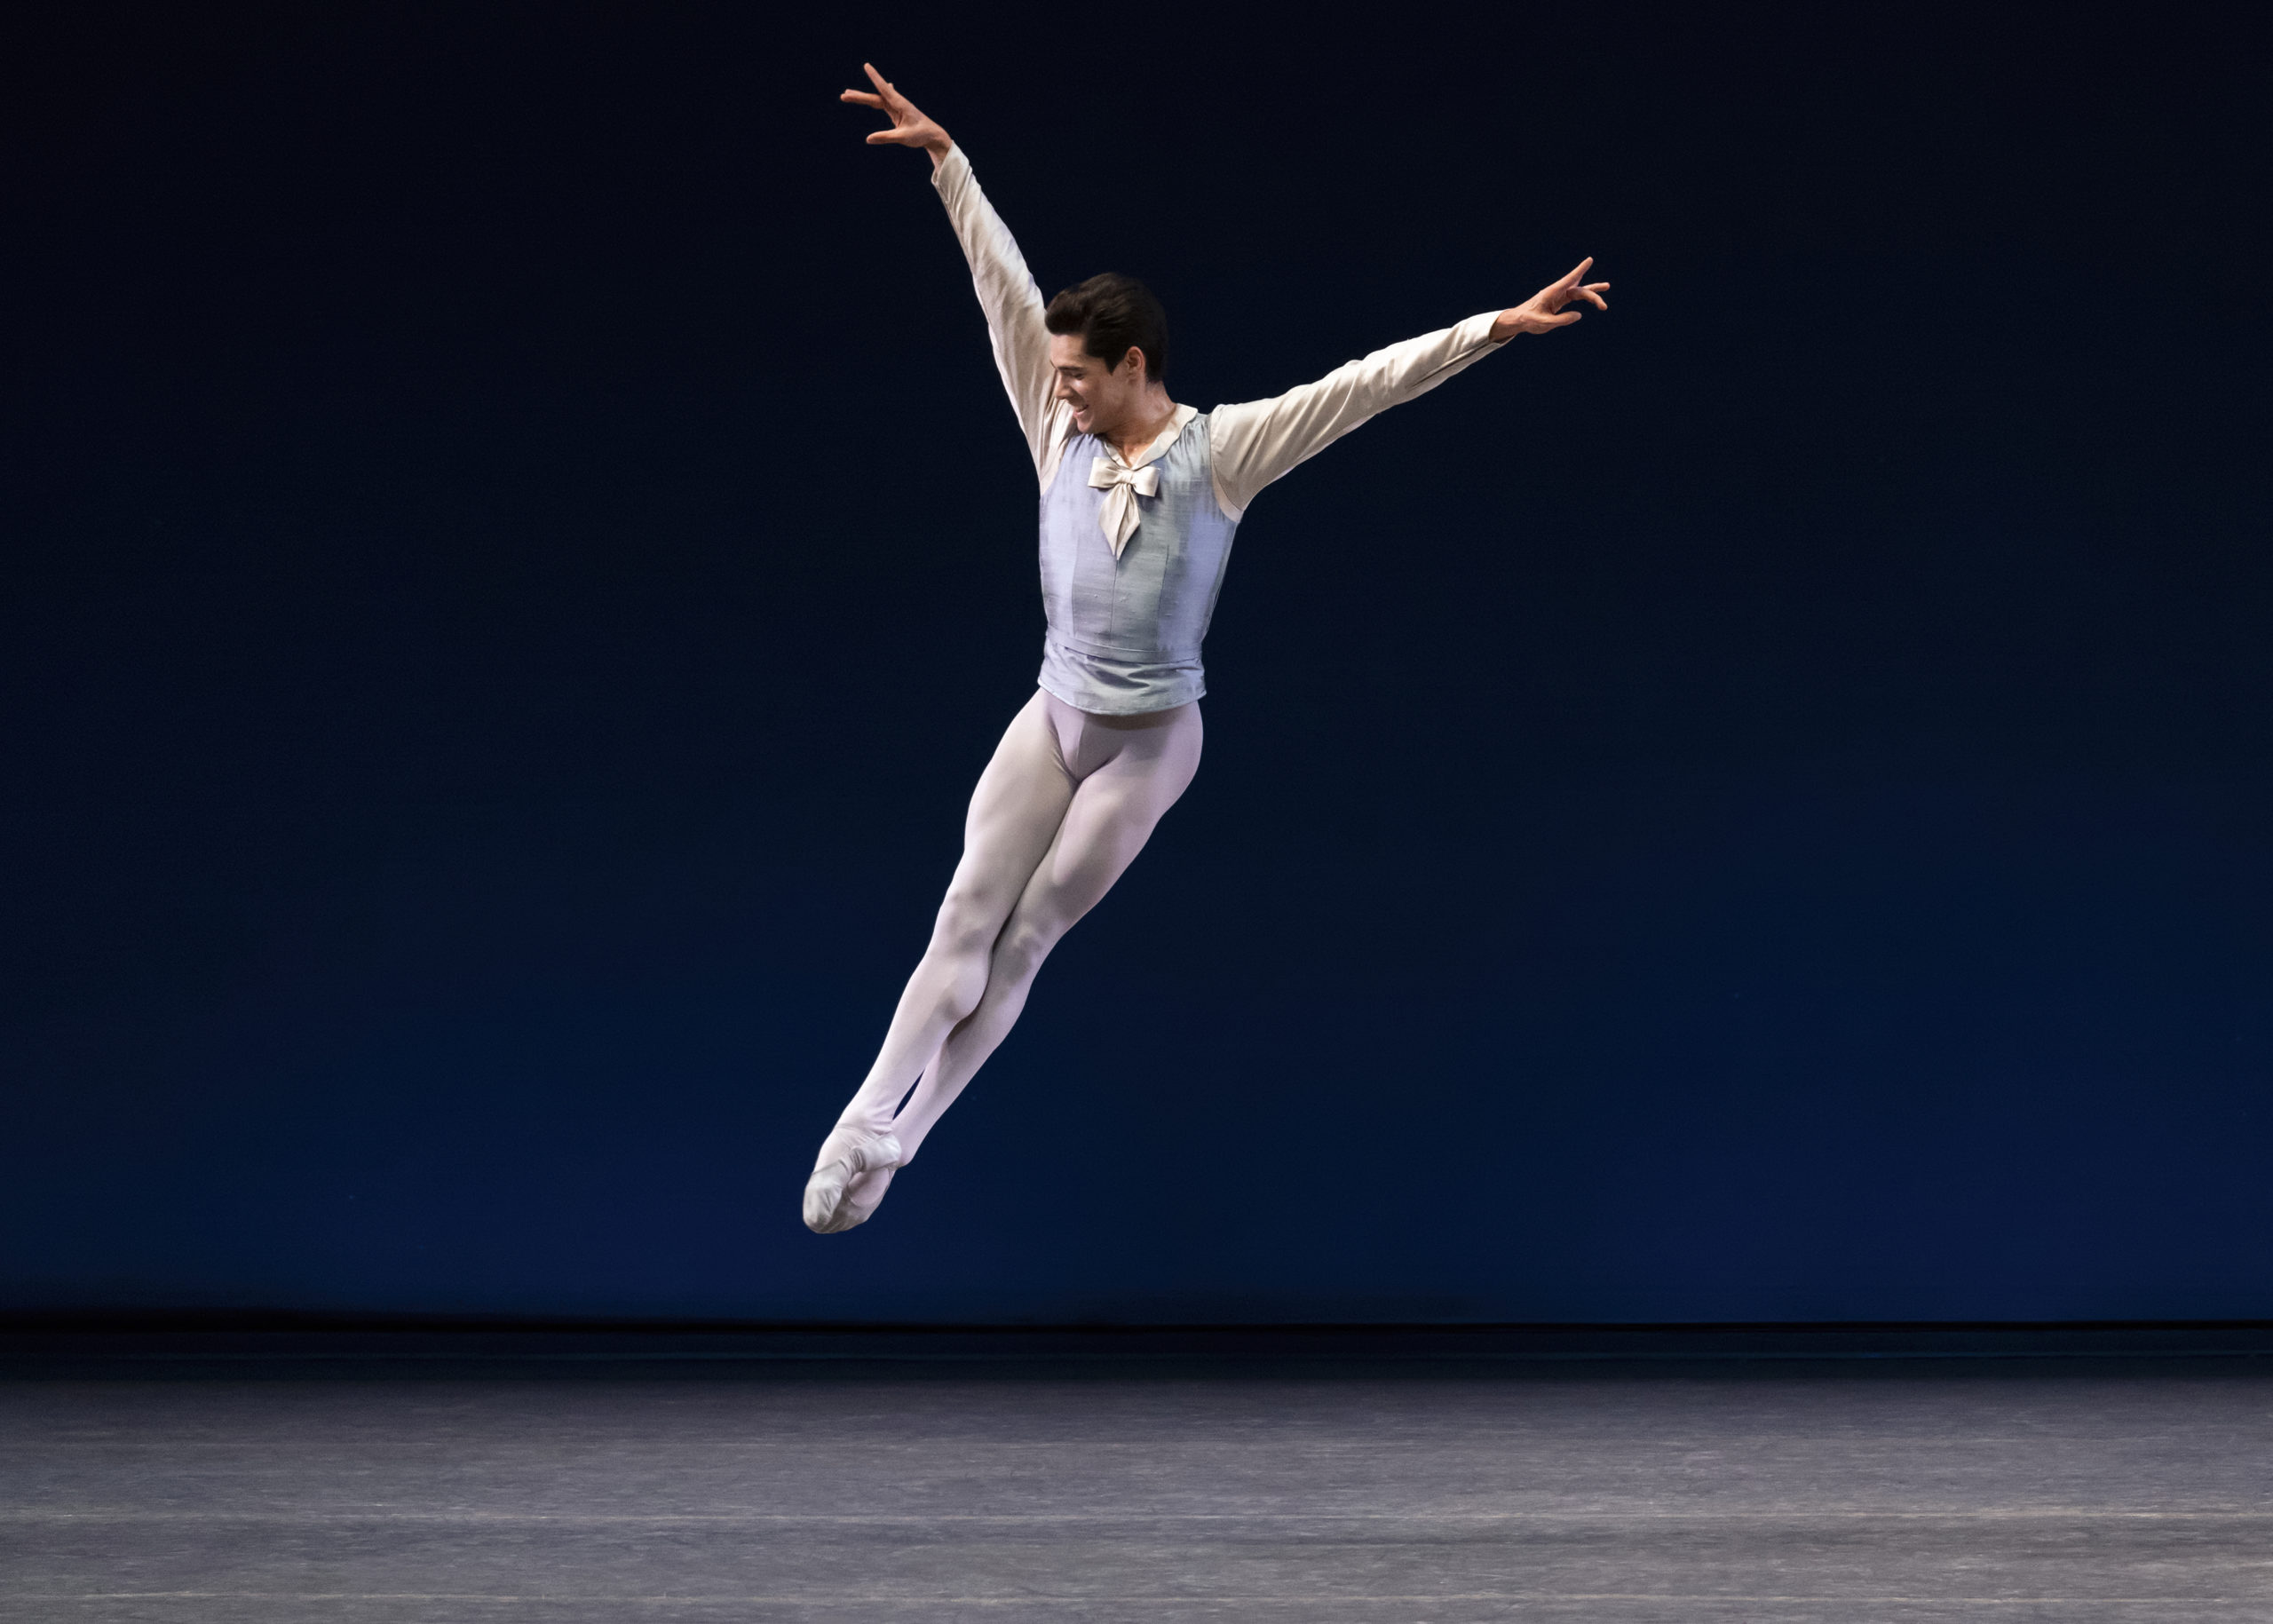 Jovani Furlan, costumed in white tights and ballet slippers and a pale blue tunic, smiles as he soars into an assemblé.